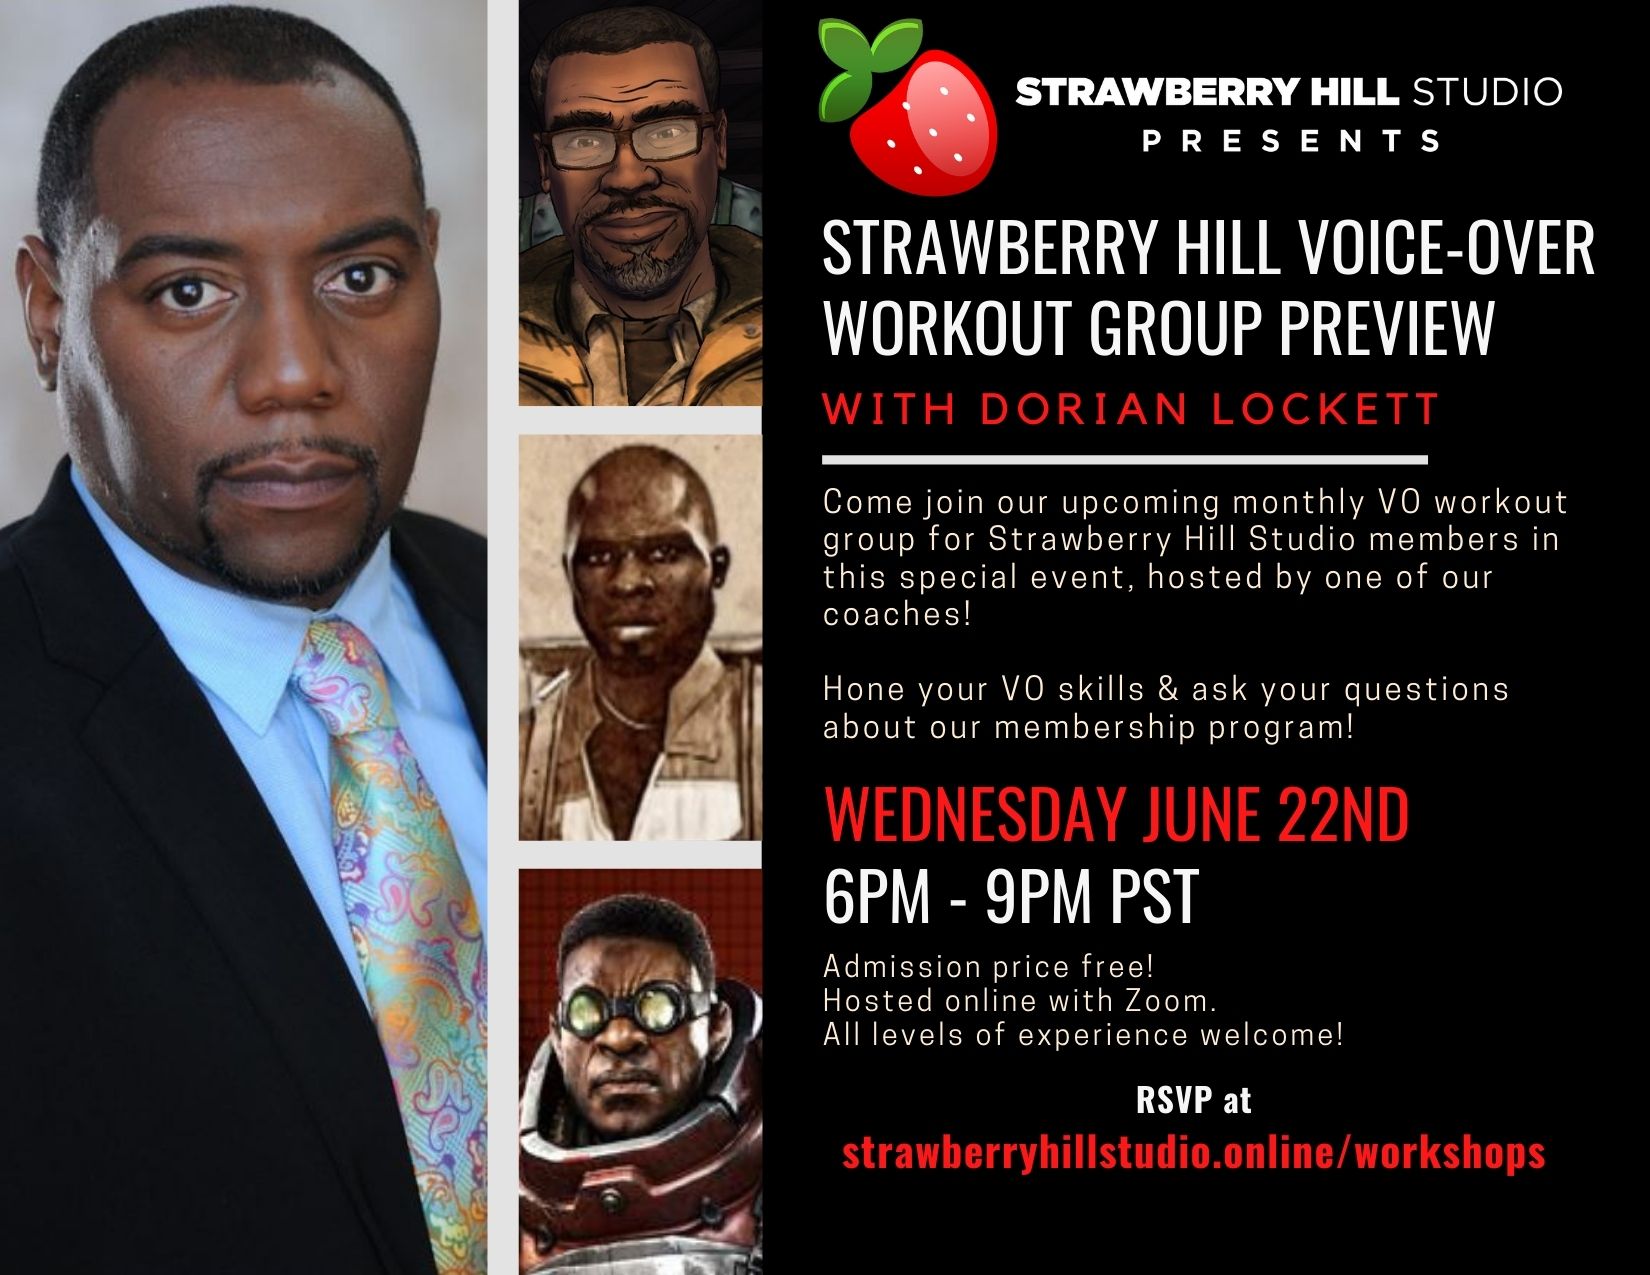 FREE EVENT - Strawberry Hill Voice-Over Workout Group Preview w/ Dorian Lockett